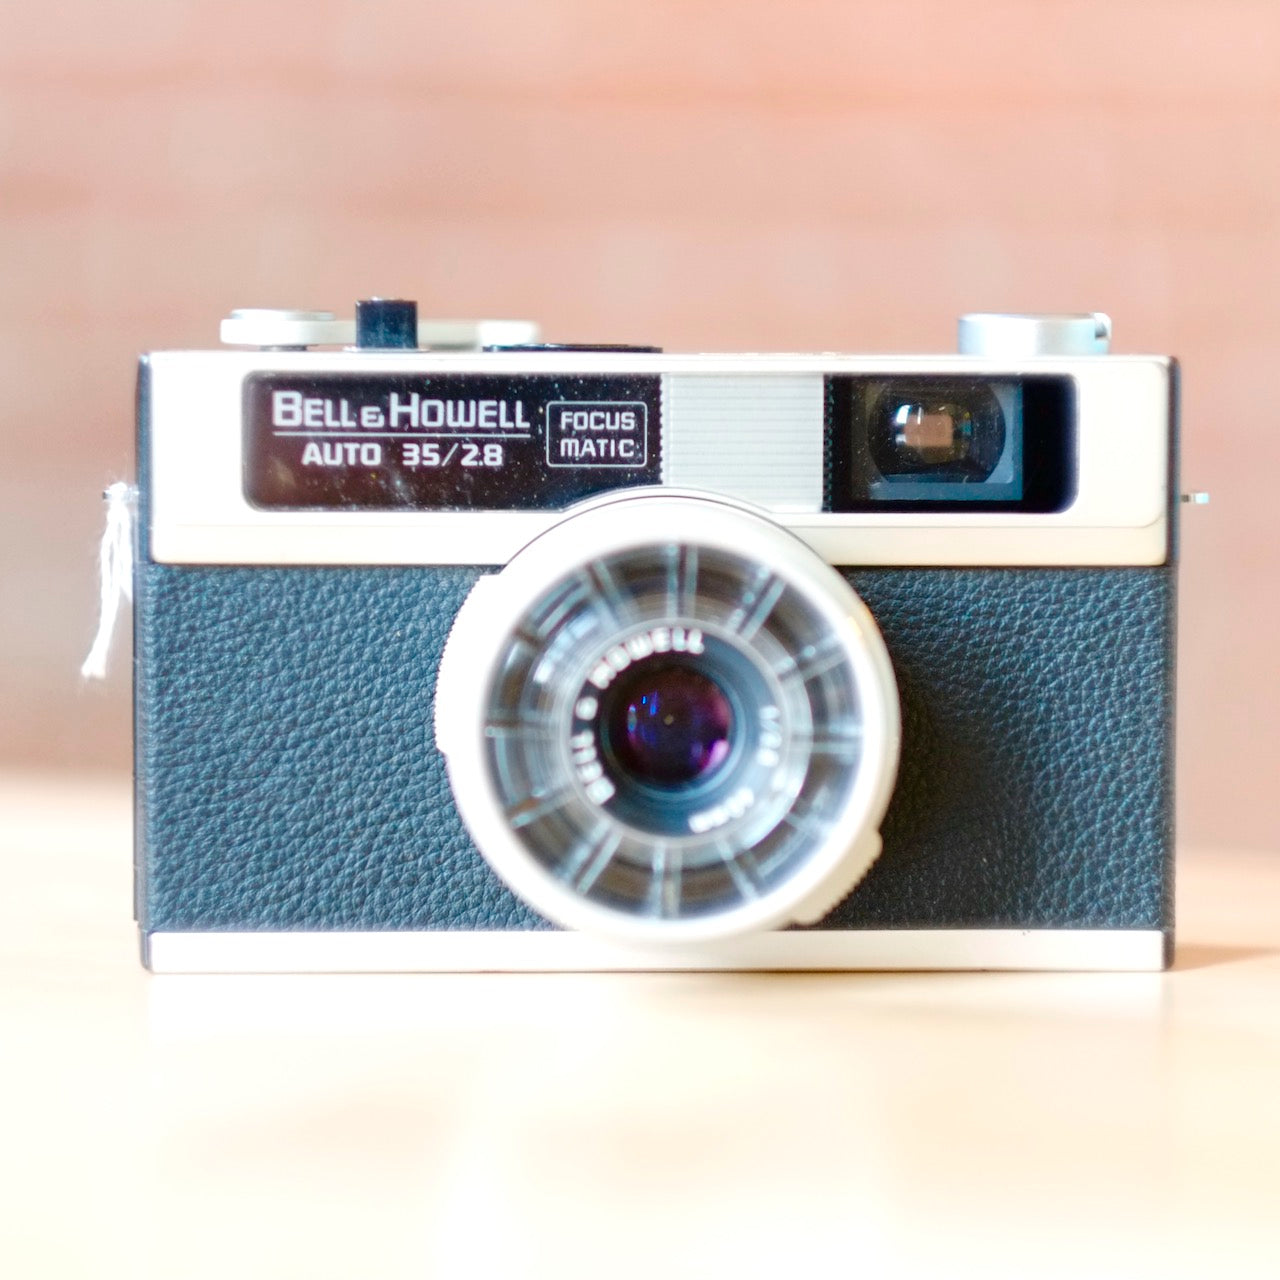 Bell & Howell Focus Matic Auto 35/2.8